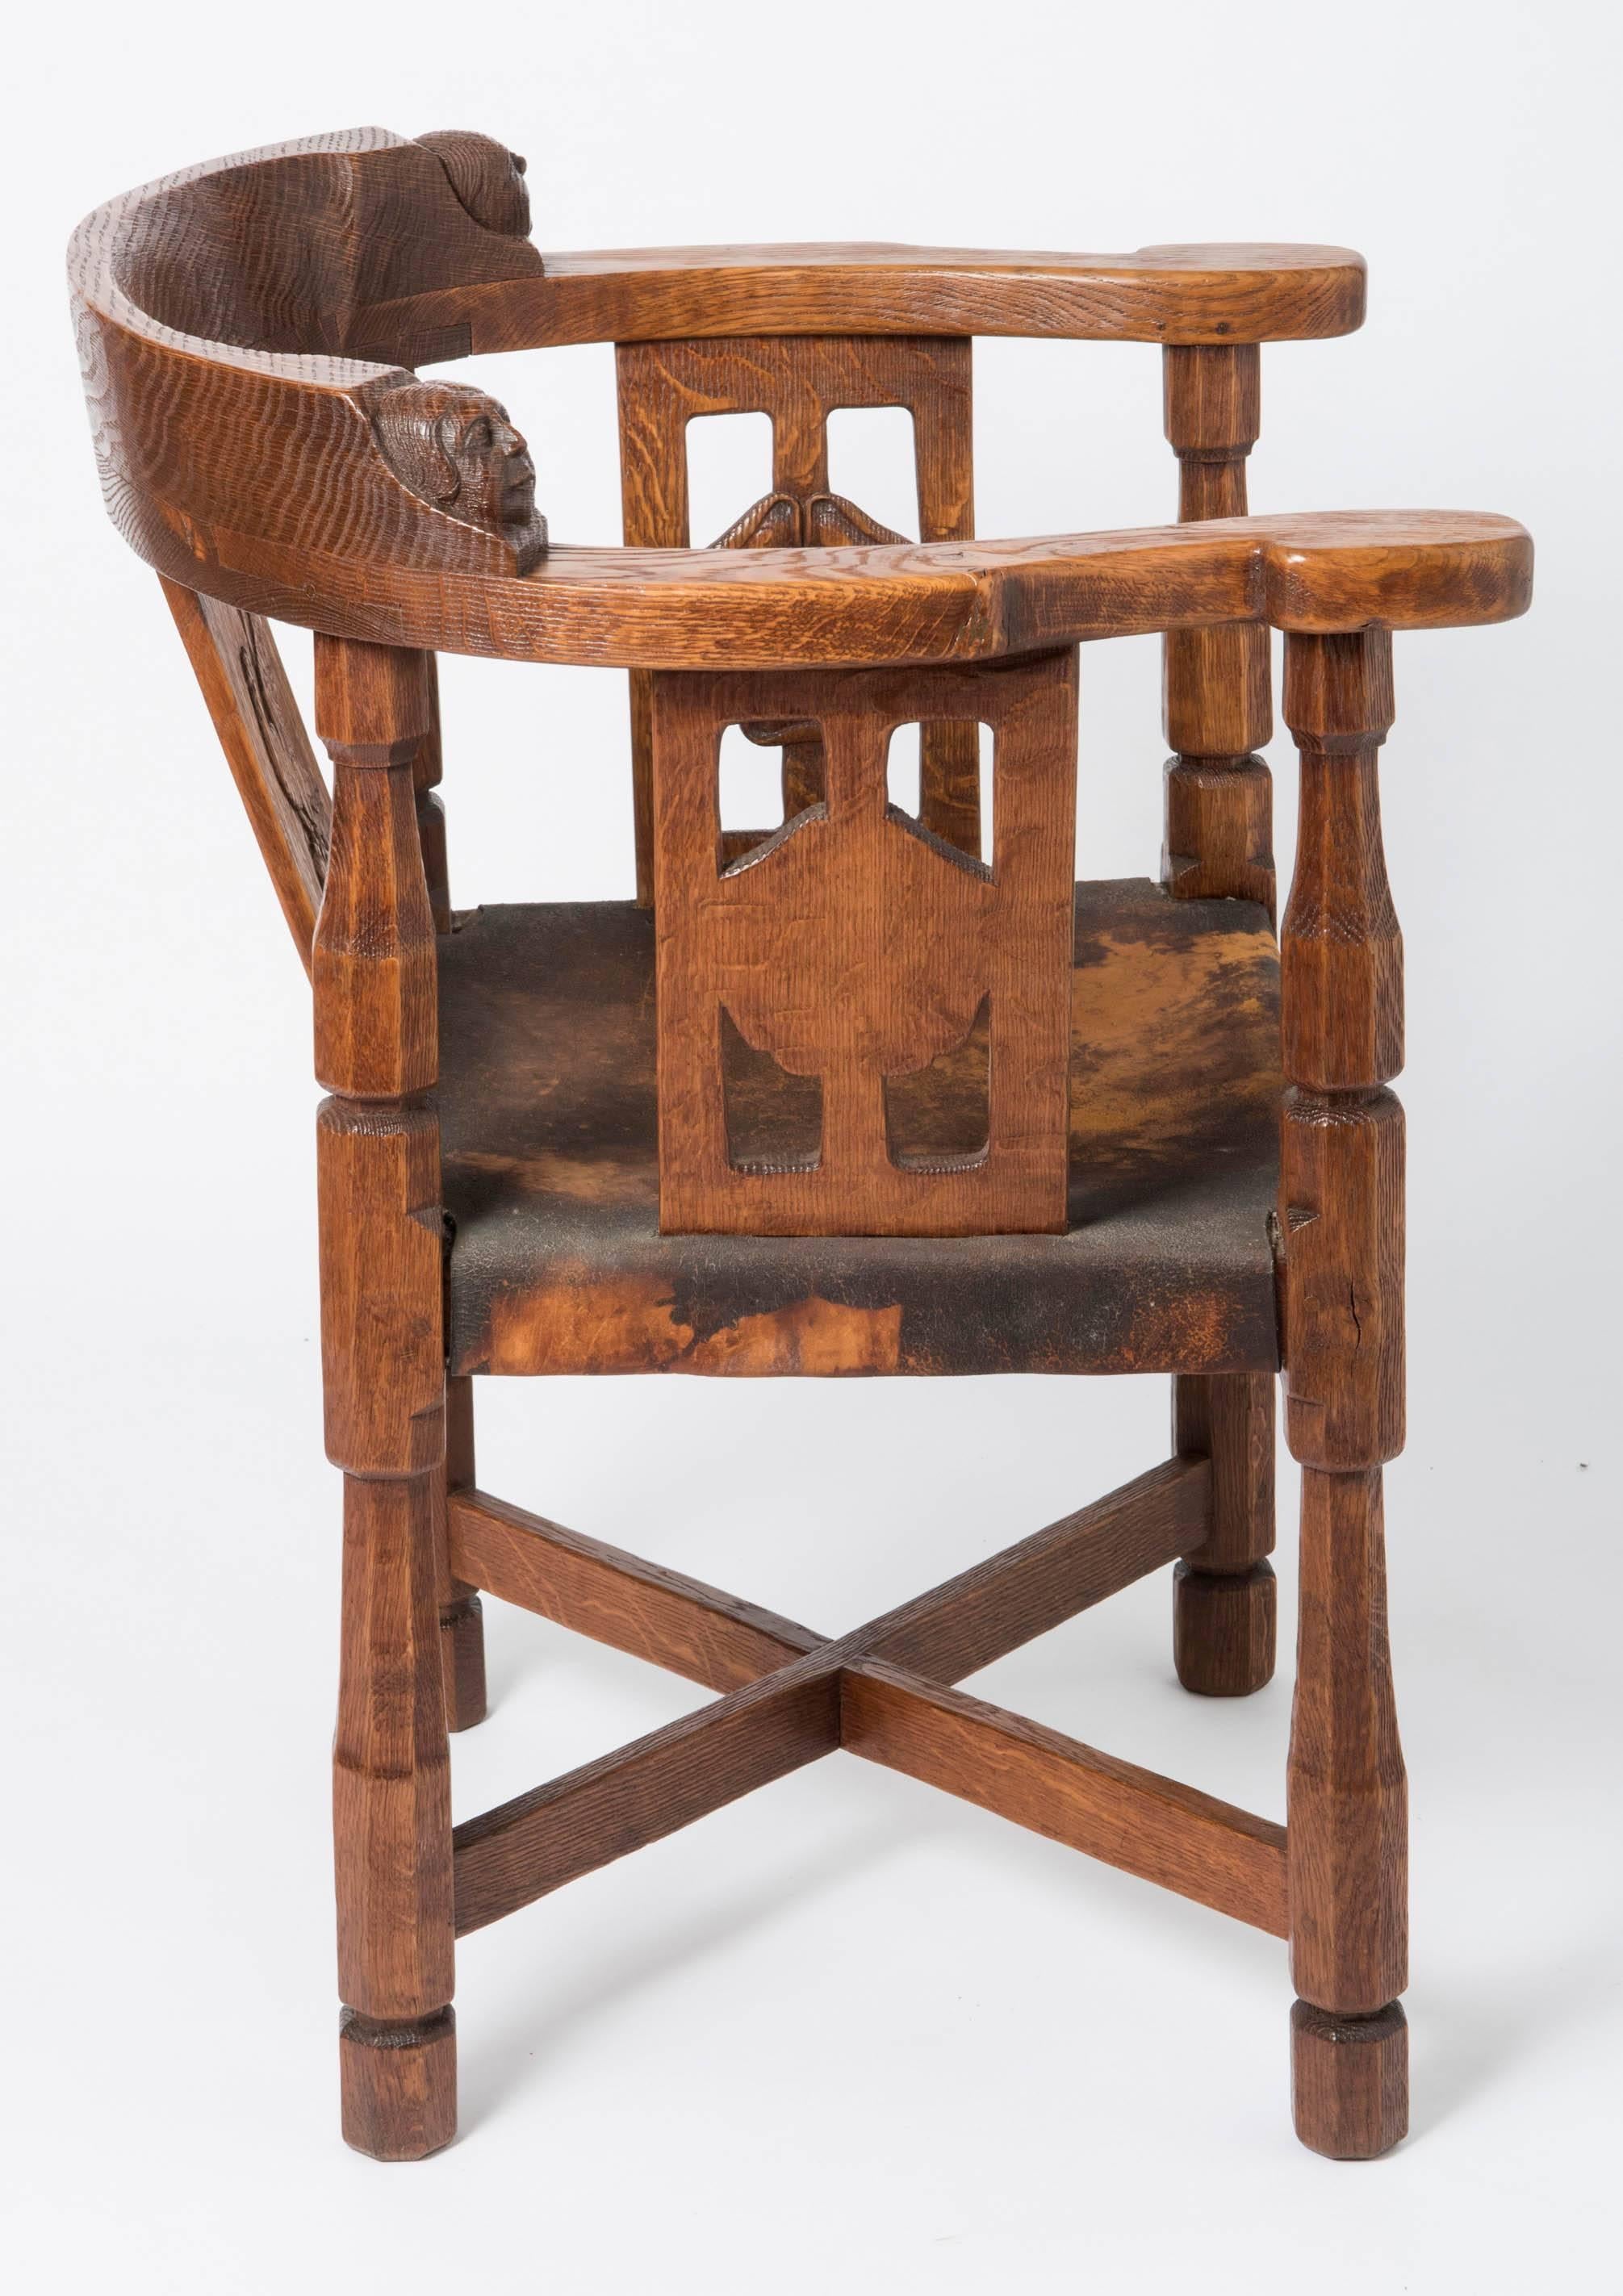 A lovely early “Monk's " chairs by Robert Thompson- Mouseman (1876-1955)
Oak
With curved top rail and arms.
Carved with Monks head, above three panels, carved with a cipher and roses.
Raised on octagonal legs joined by an